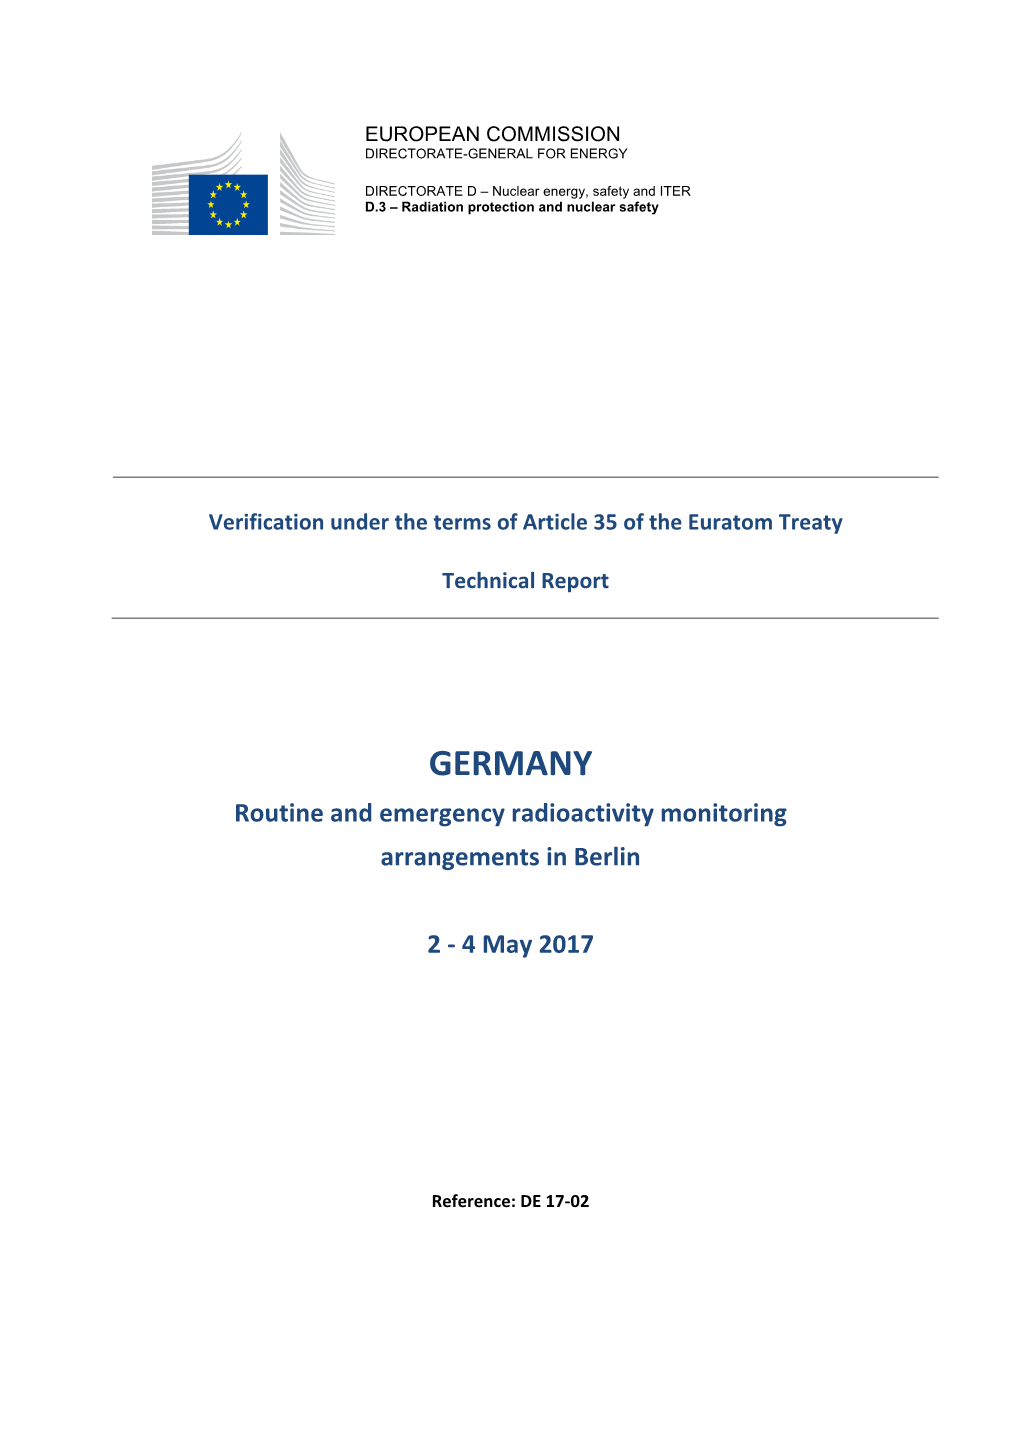 GERMANY Routine and Emergency Radioactivity Monitoring Arrangements in Berlin